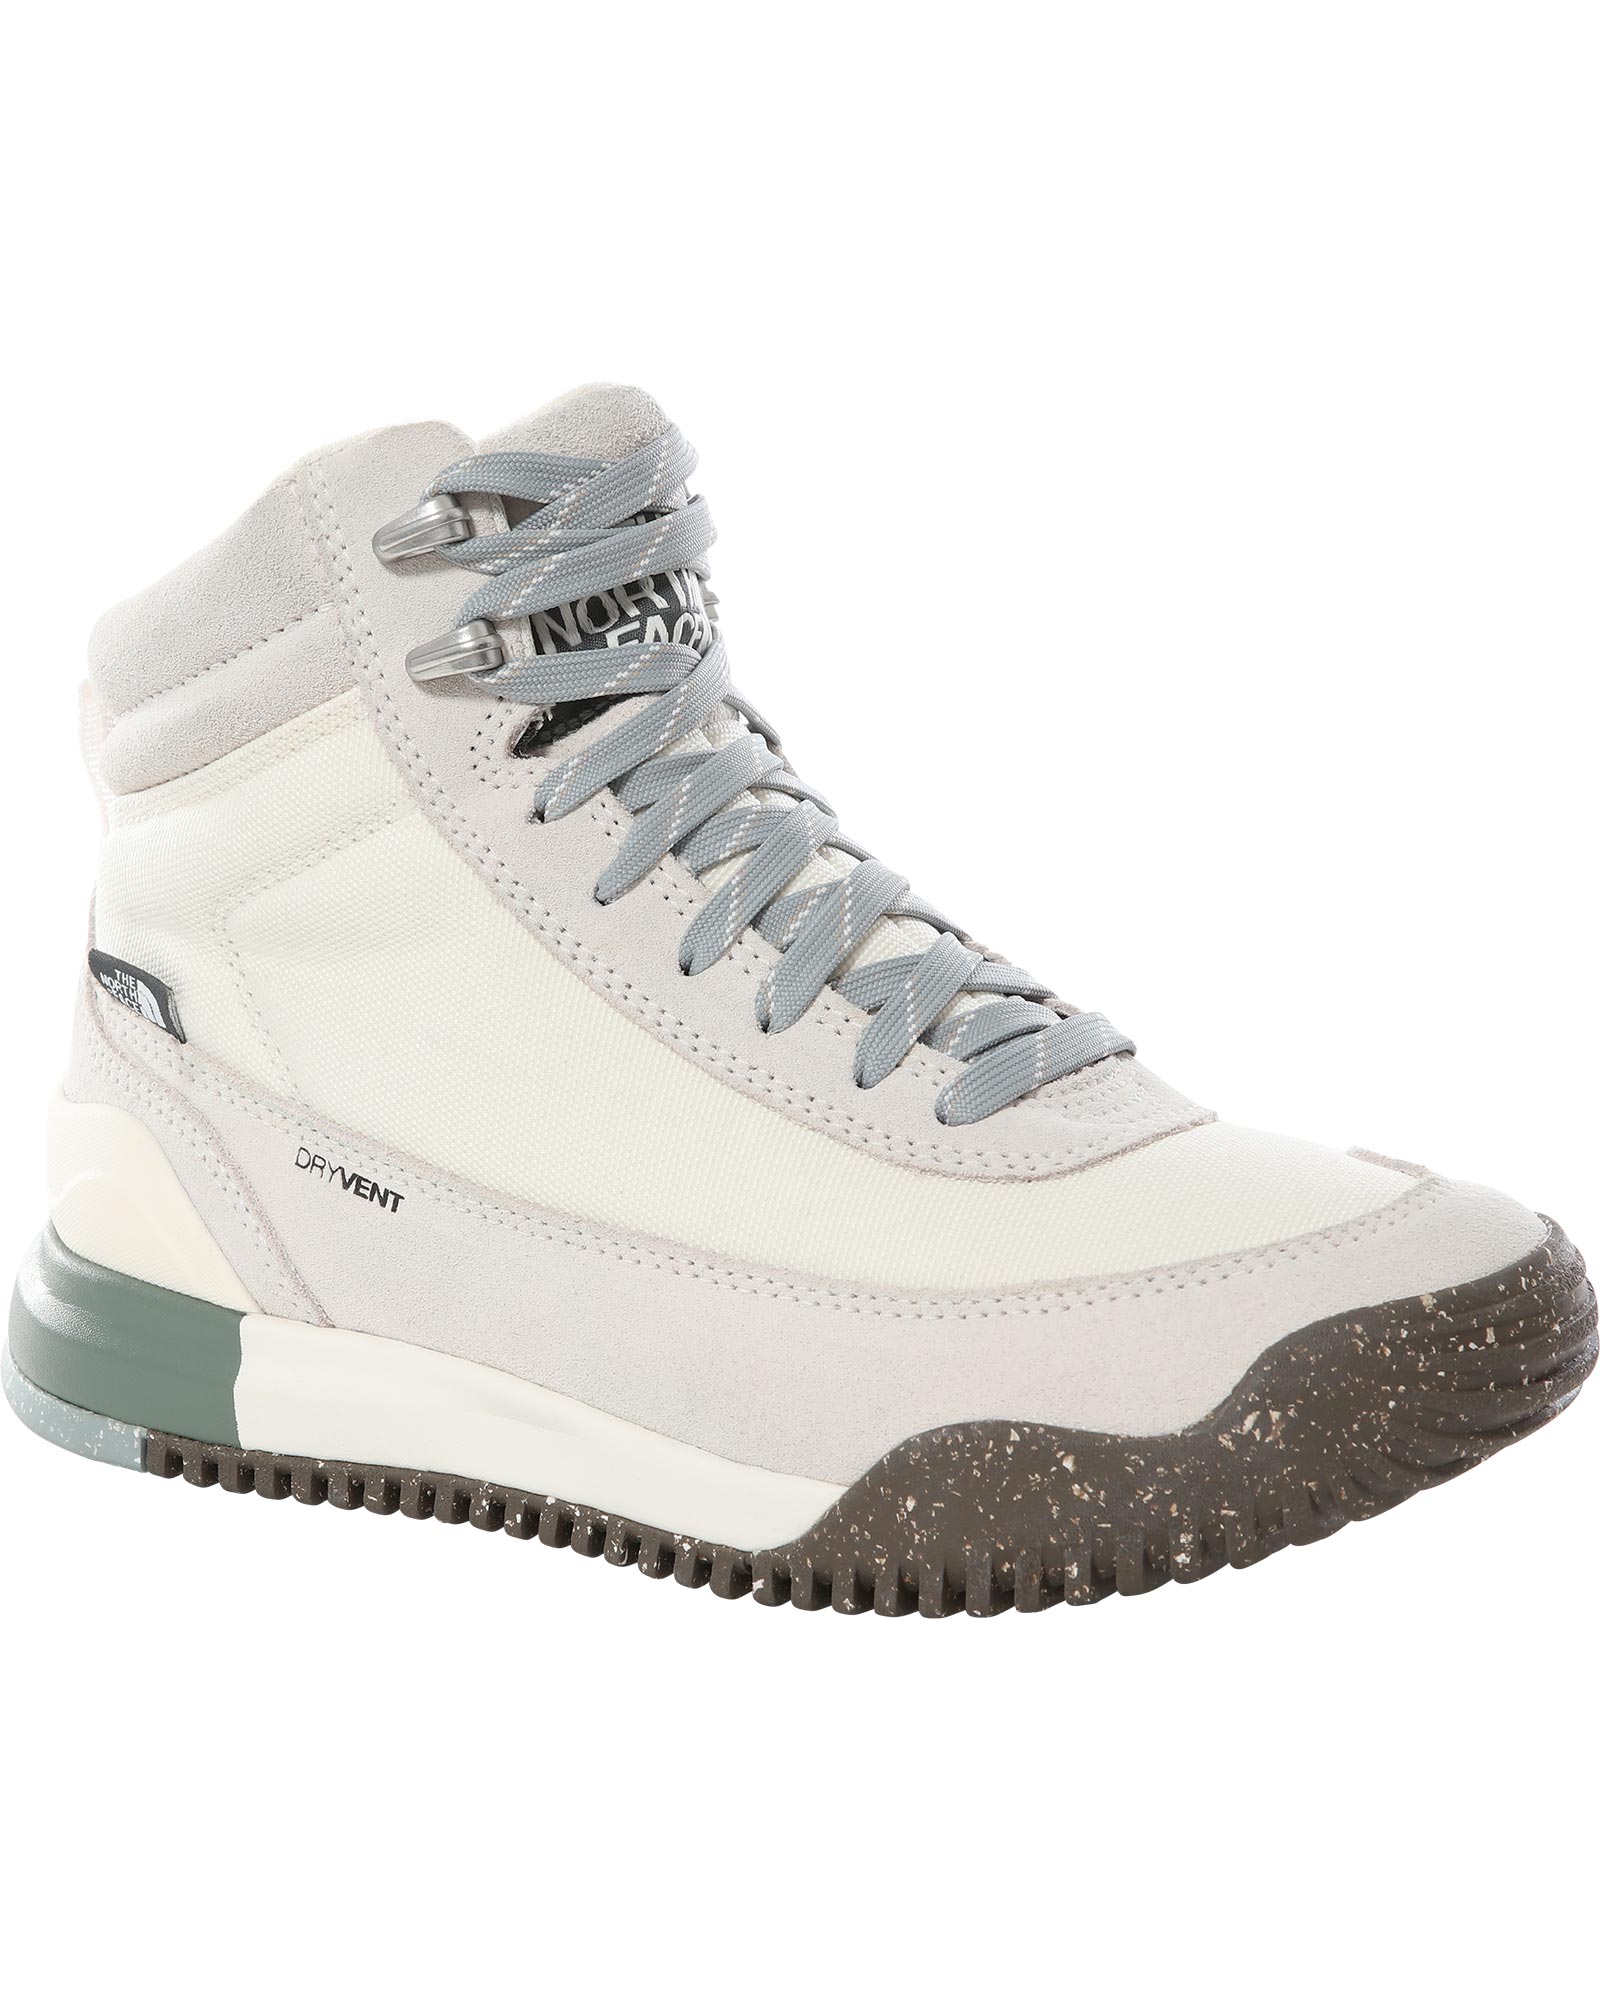 Product image of The North Face Back-to-Berkeley III Textile Women's Waterproof Boots